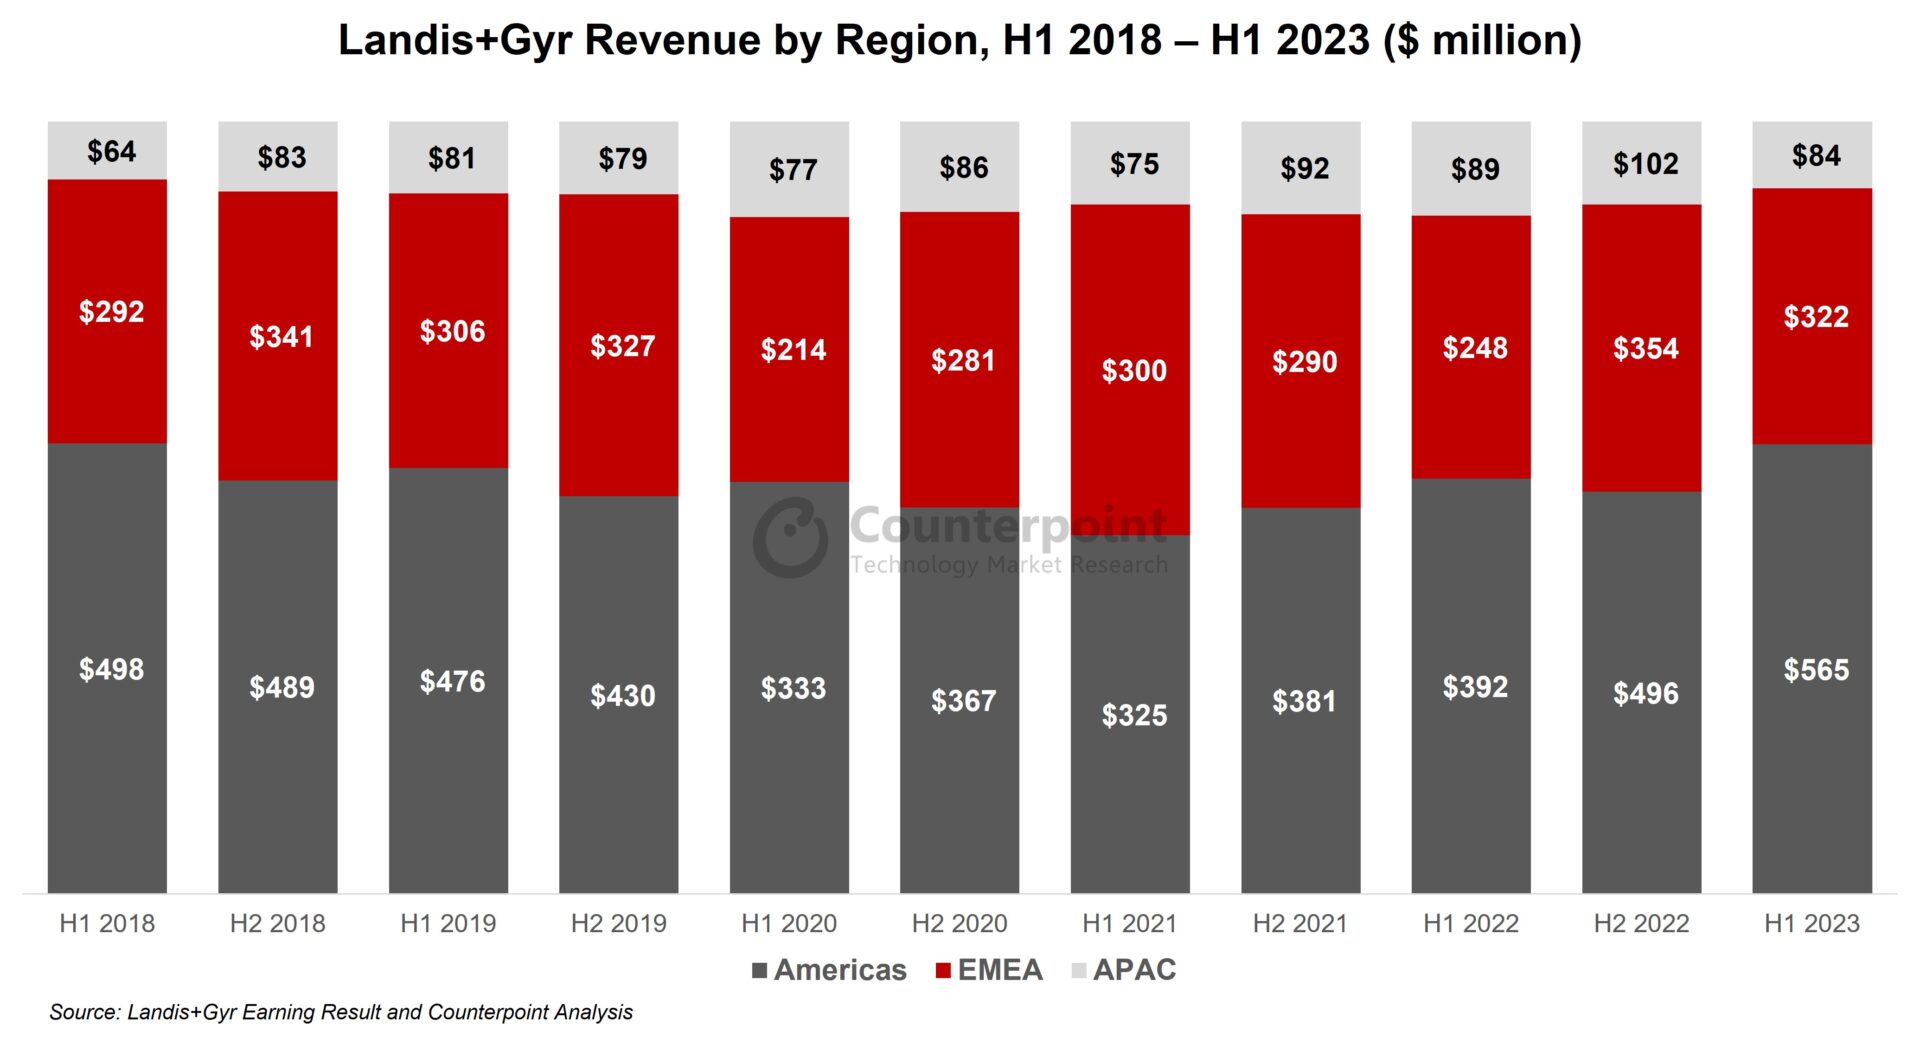 A graph showing Landis+Gyr Revenue by Region in H1 2018 compared with H1 2023